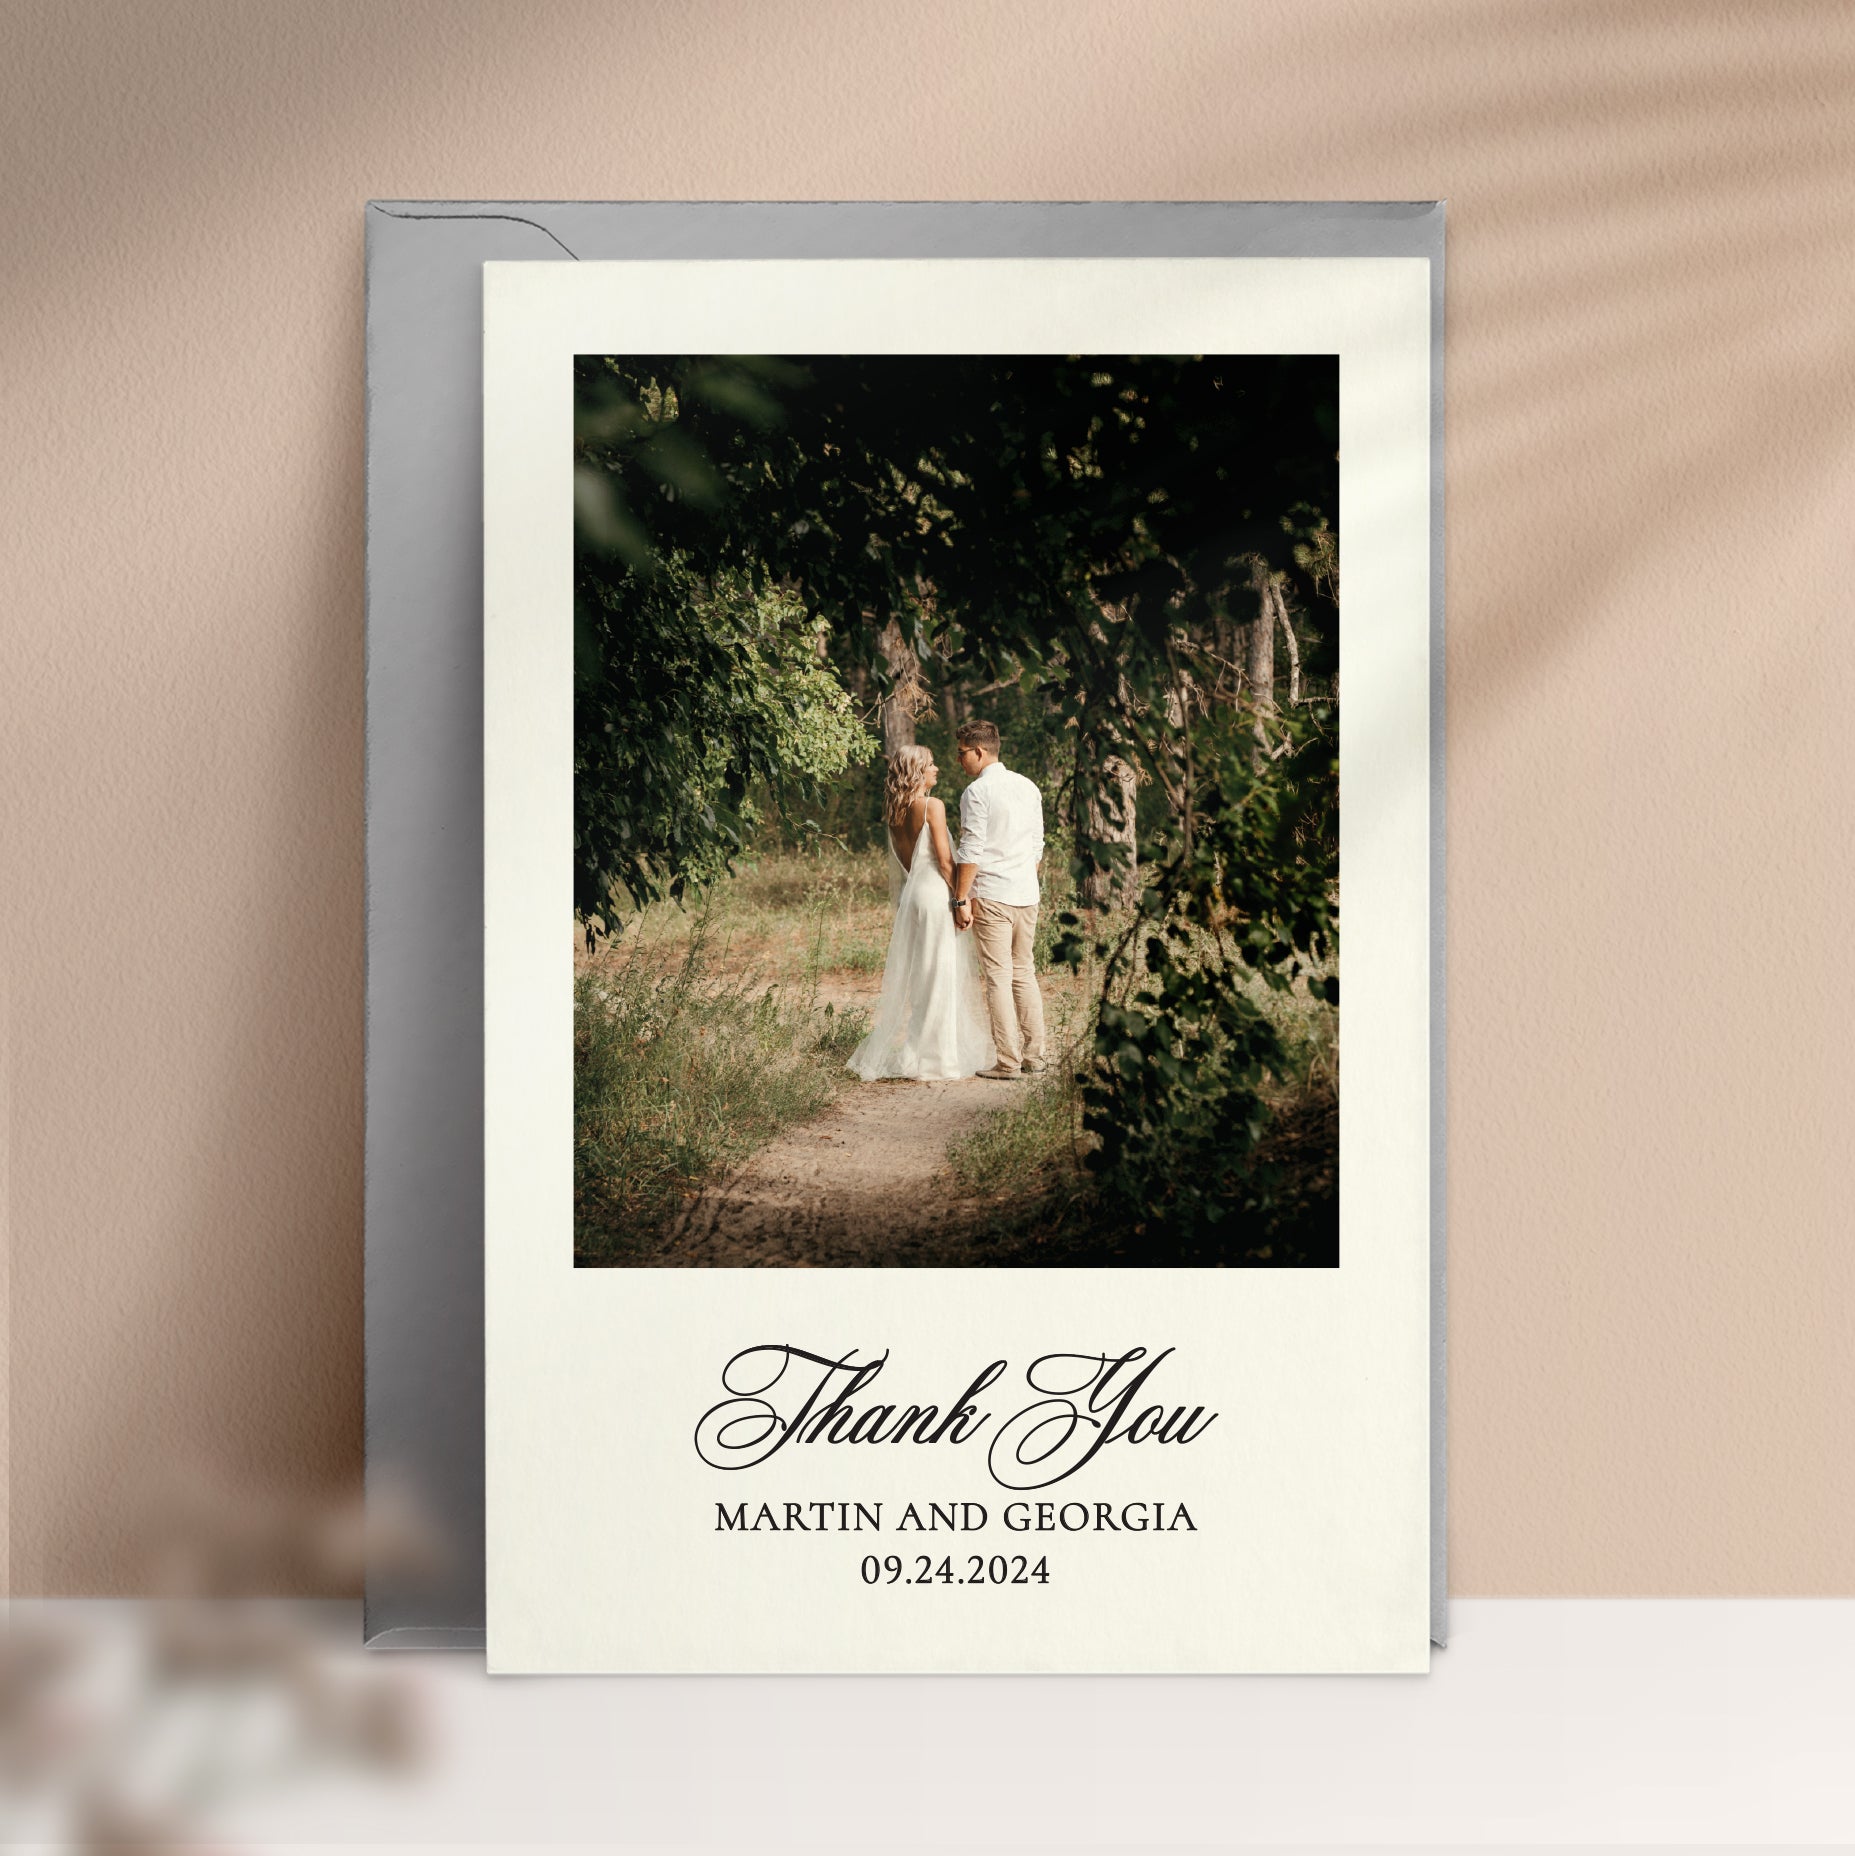 personalized wedding thank you cards with custom photo, names and wedding date with calligraphy font - XOXOKristen